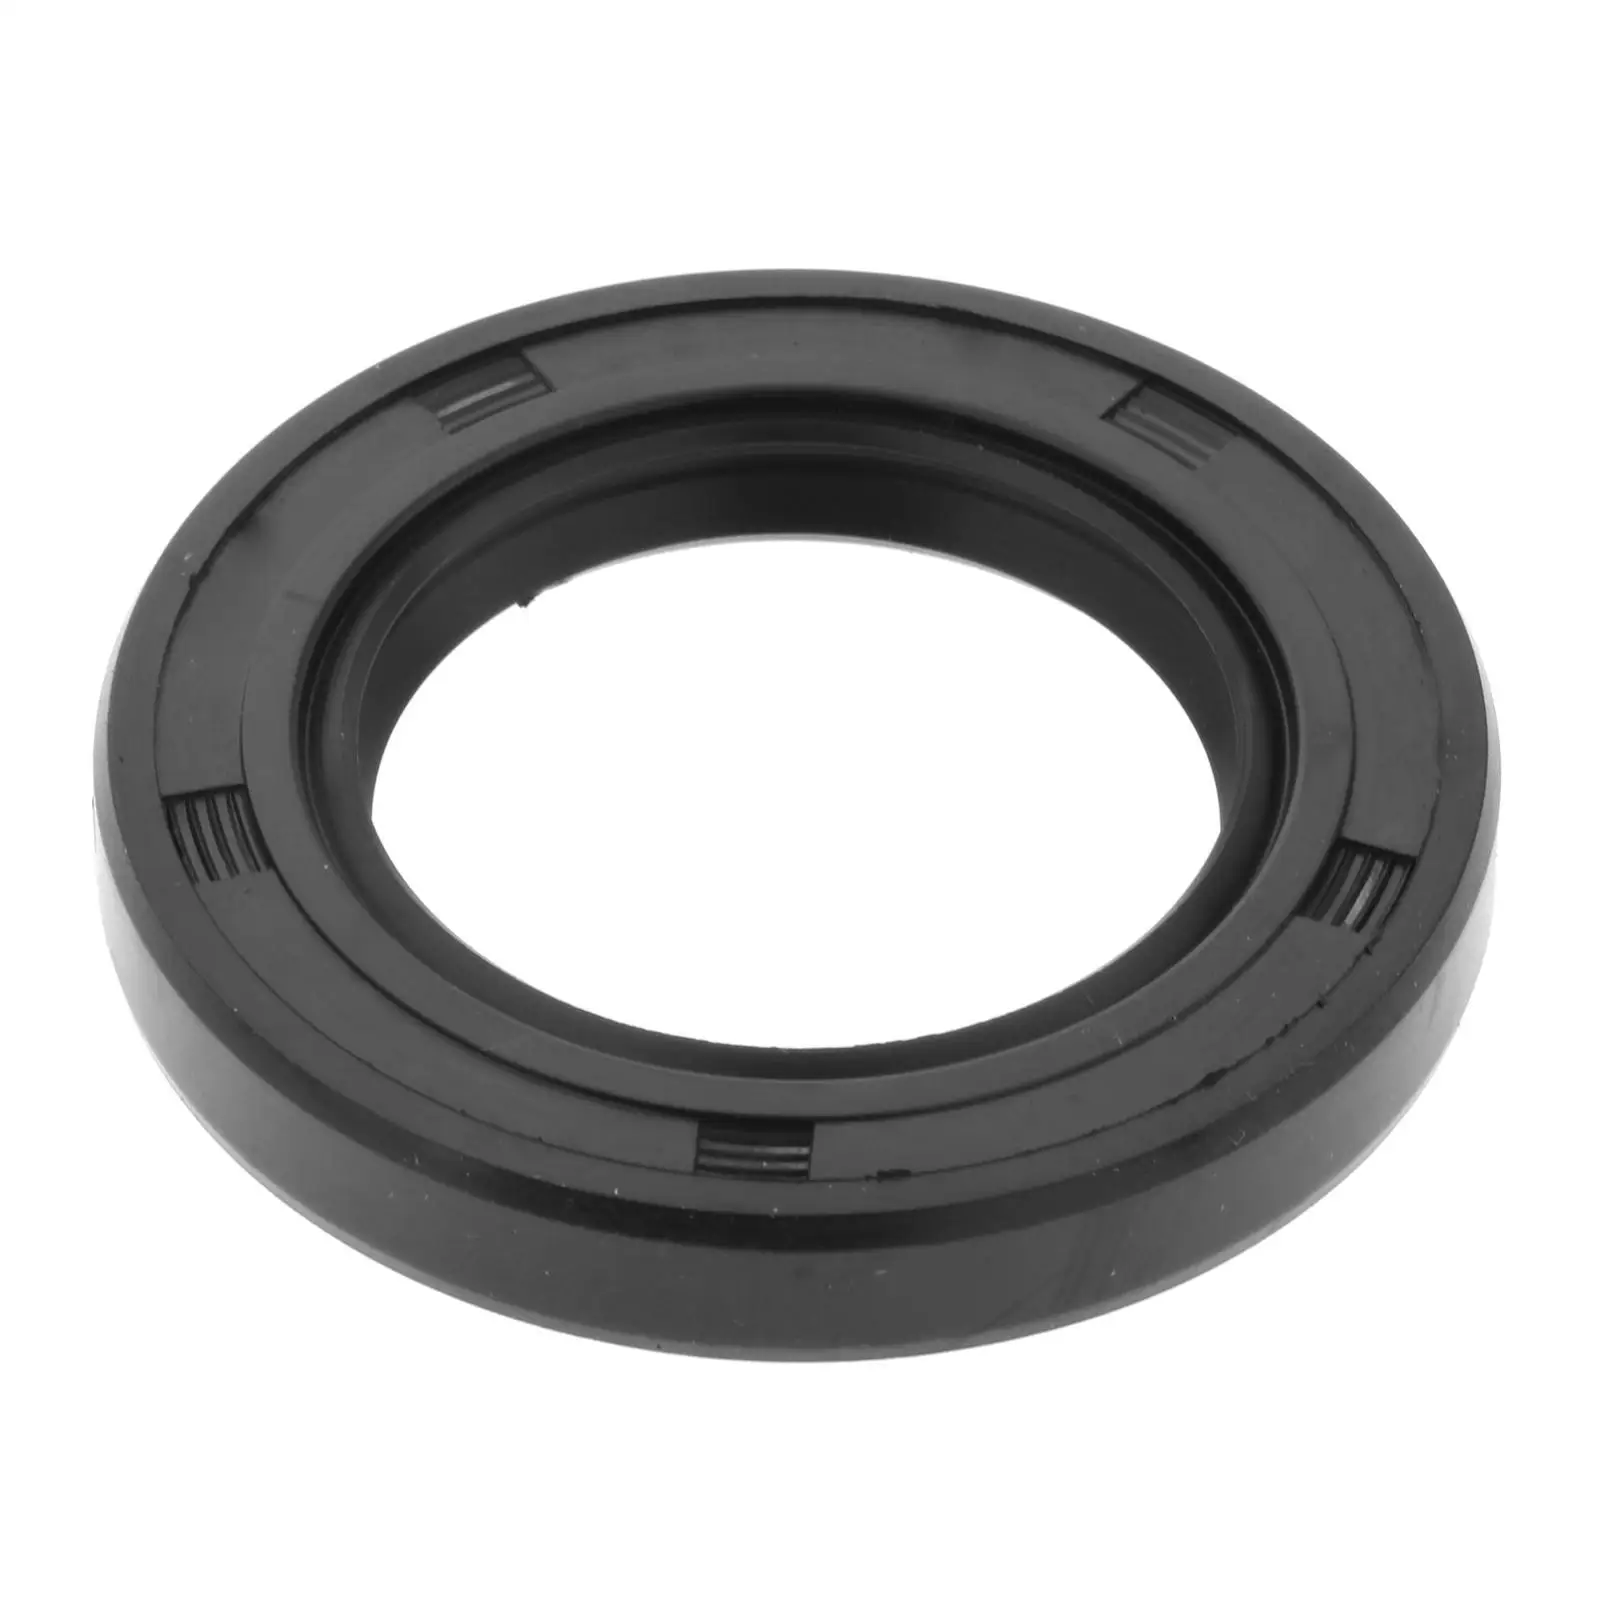 Oil Seal Fit for Yamaha Outboard Motor 2T 60HP-90HP Spare Parts Accessory